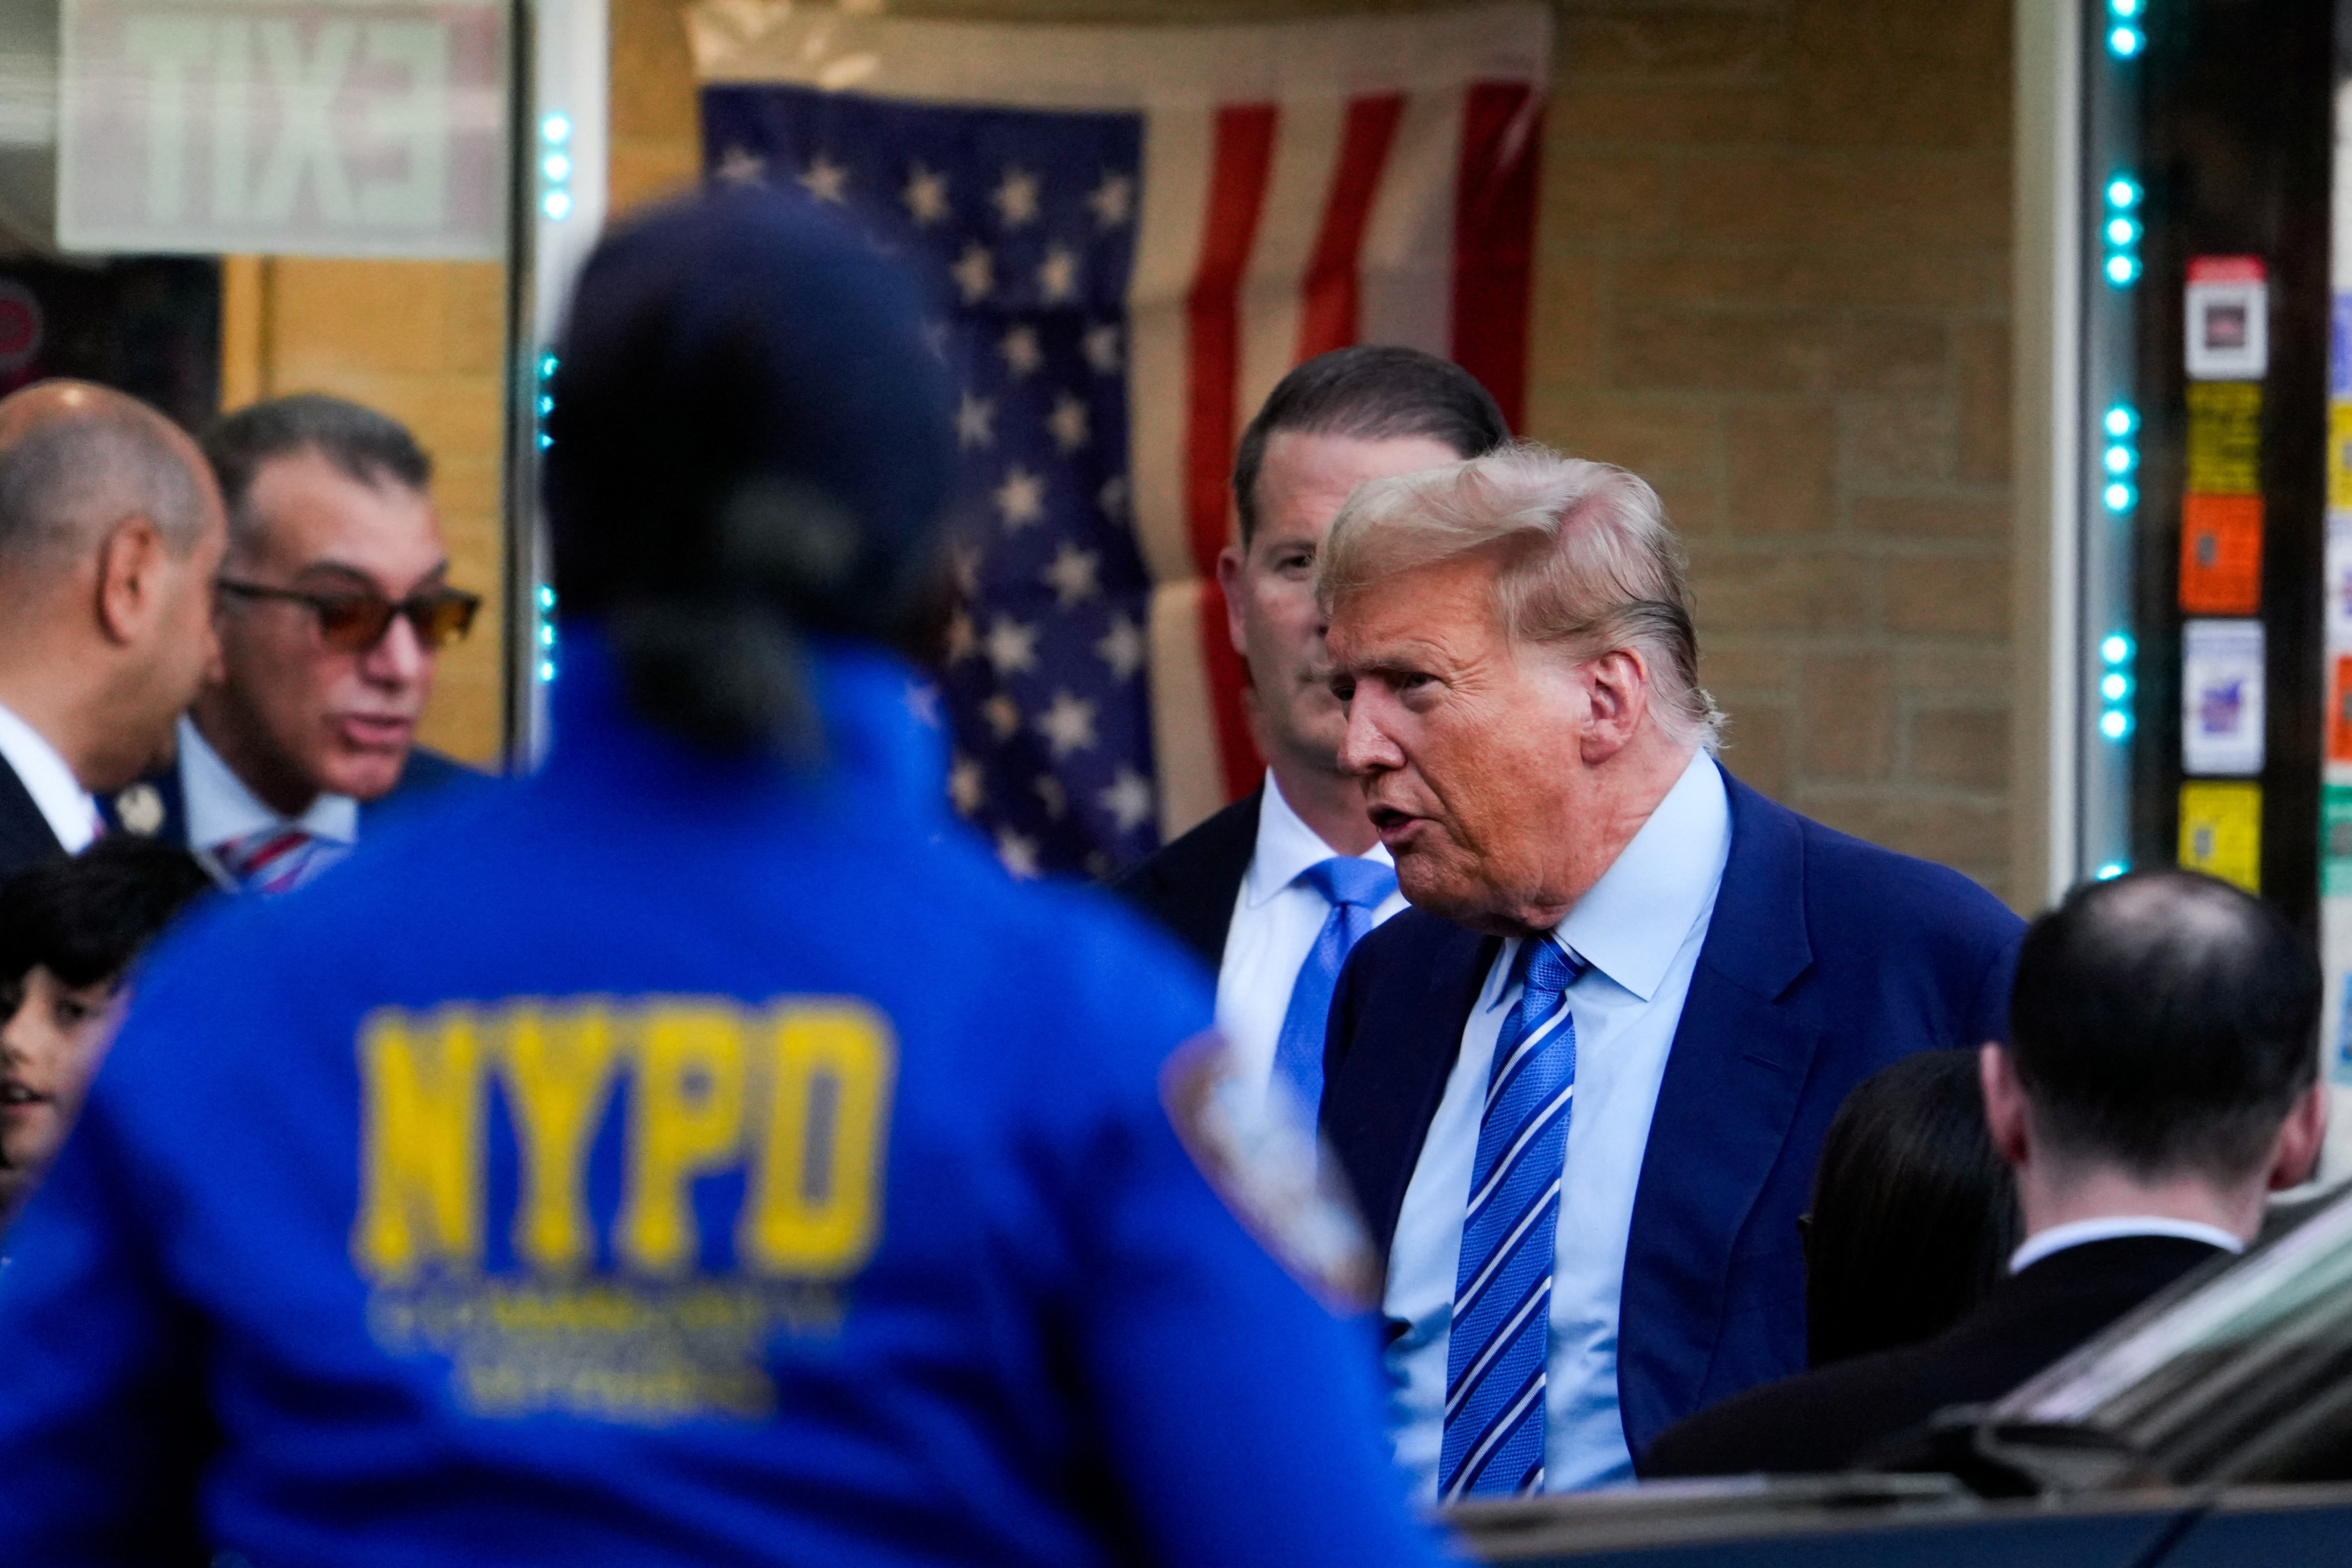 Republican presidential candidate and former U.S. President Donald Trump, in the Harlem section of New York